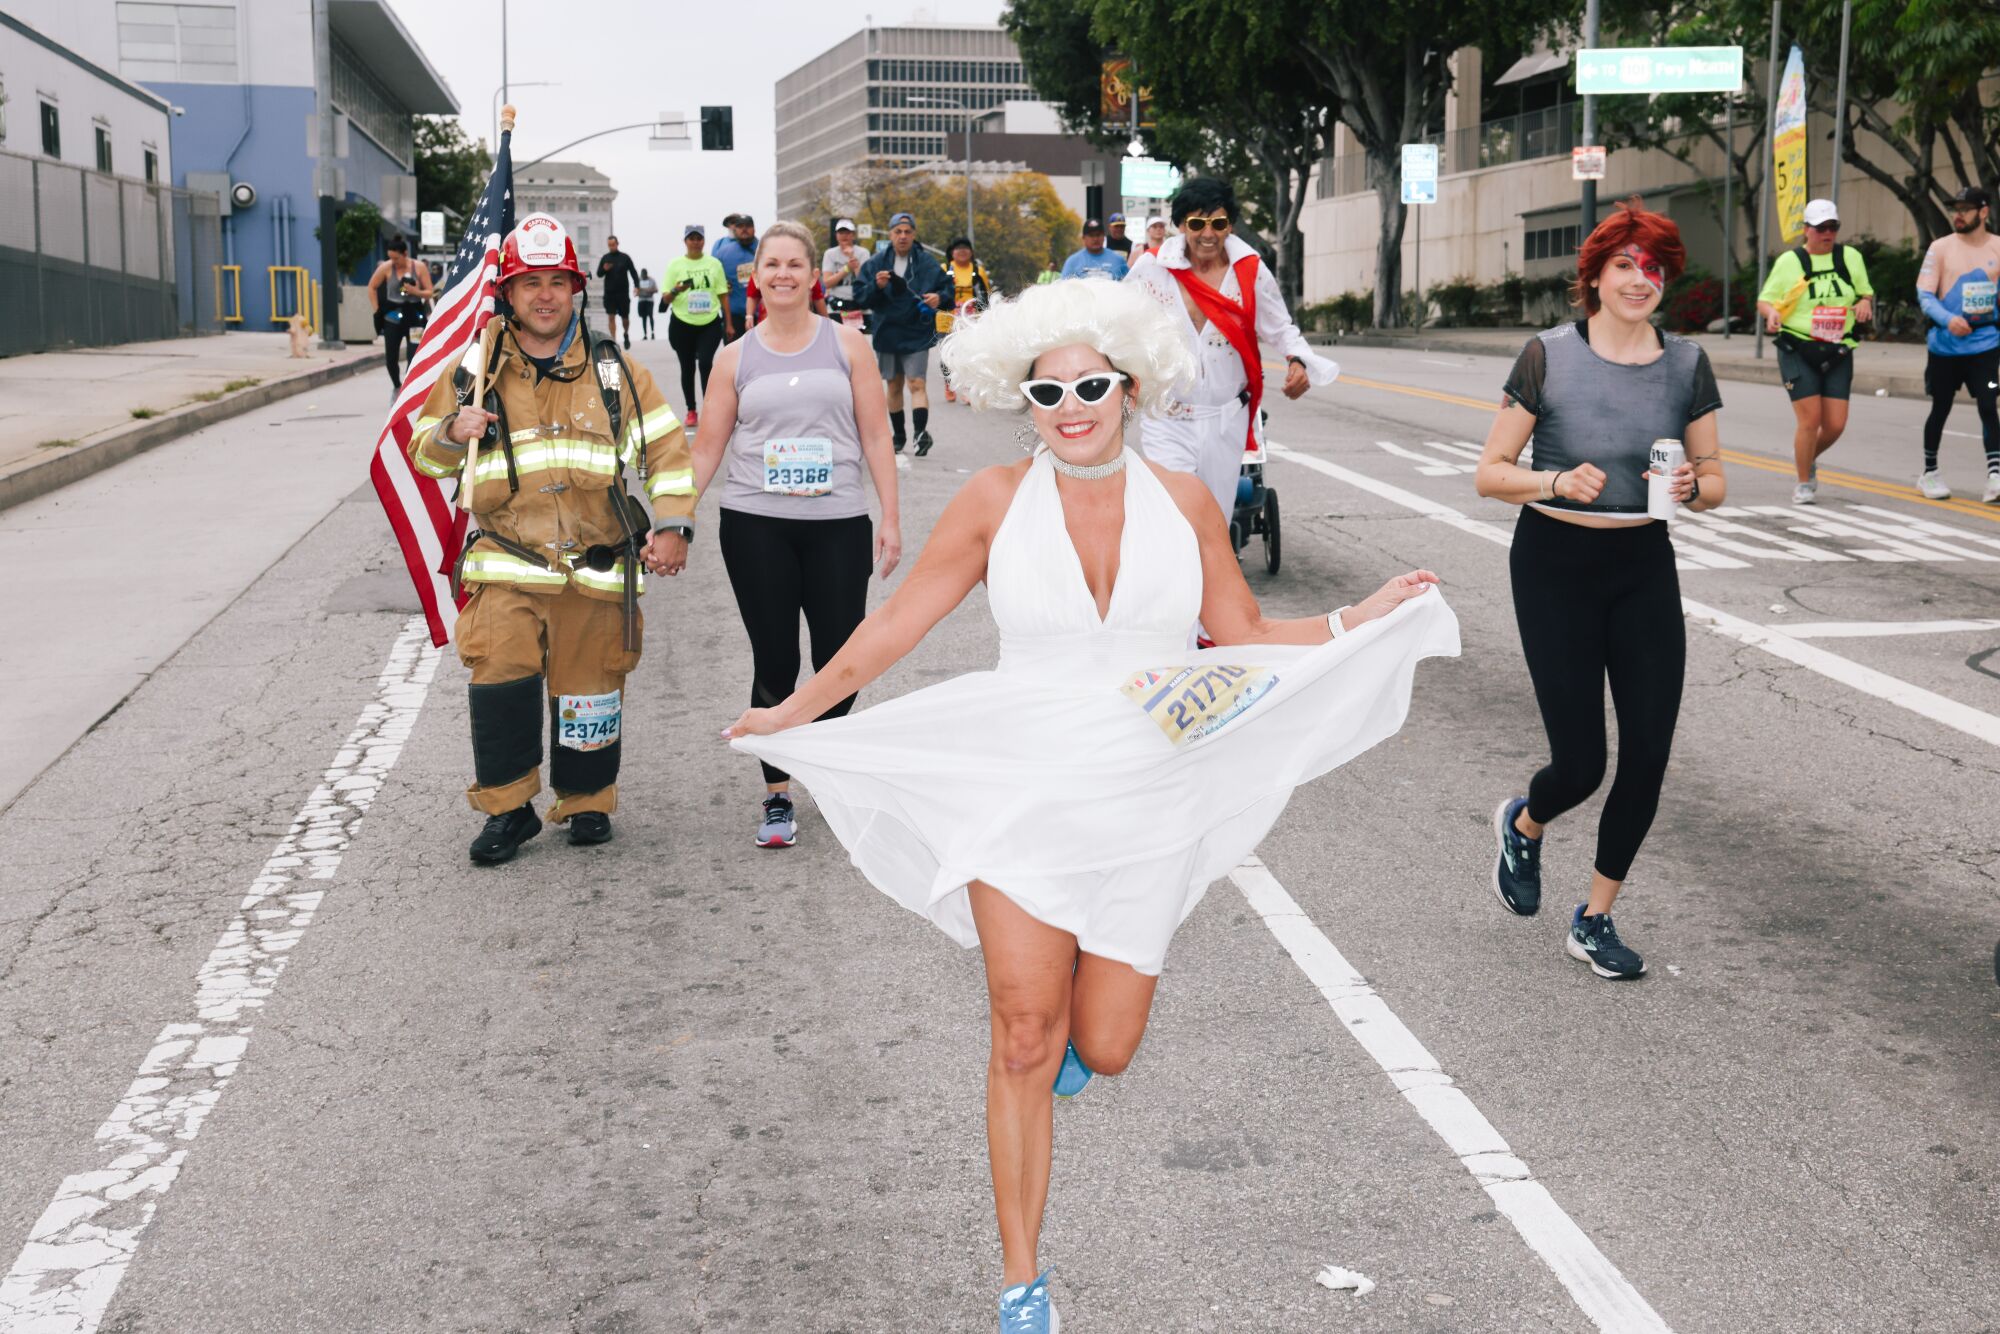 A runner dressed as Marilyn Monroe in a wig, sunglasses and a white dress.